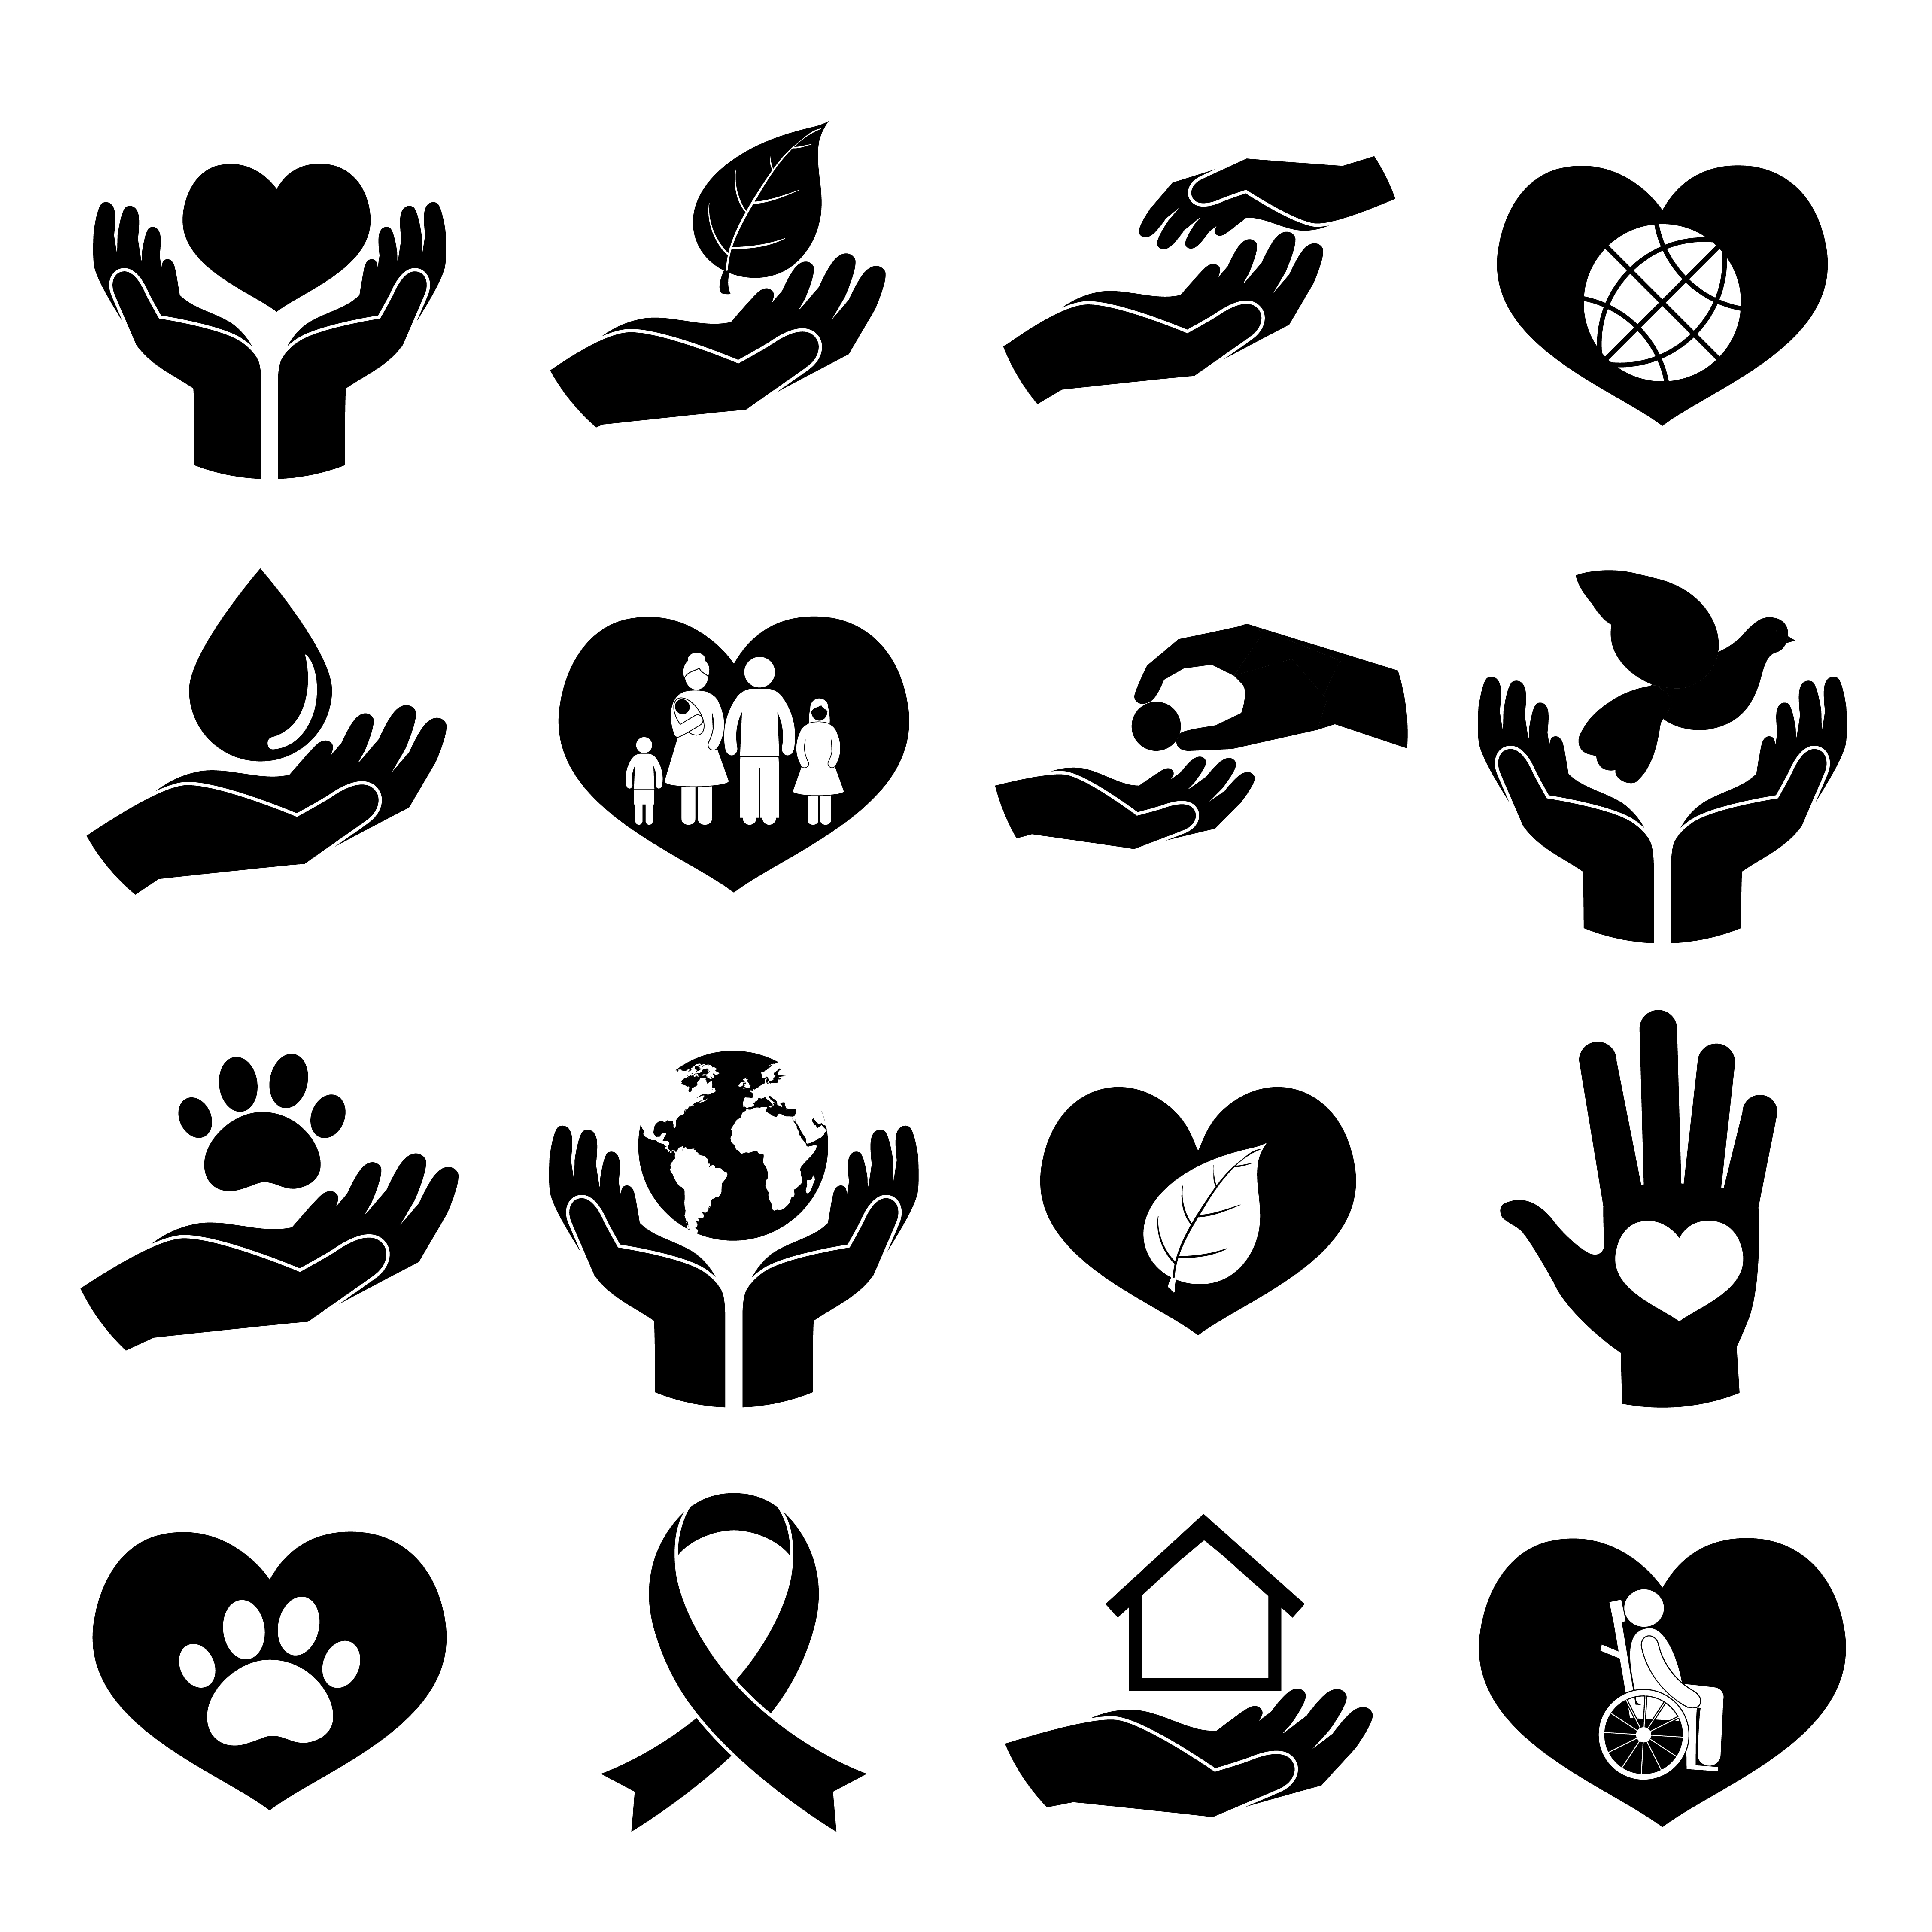 Charity And Donation Icons Black Download Free Vectors Clipart